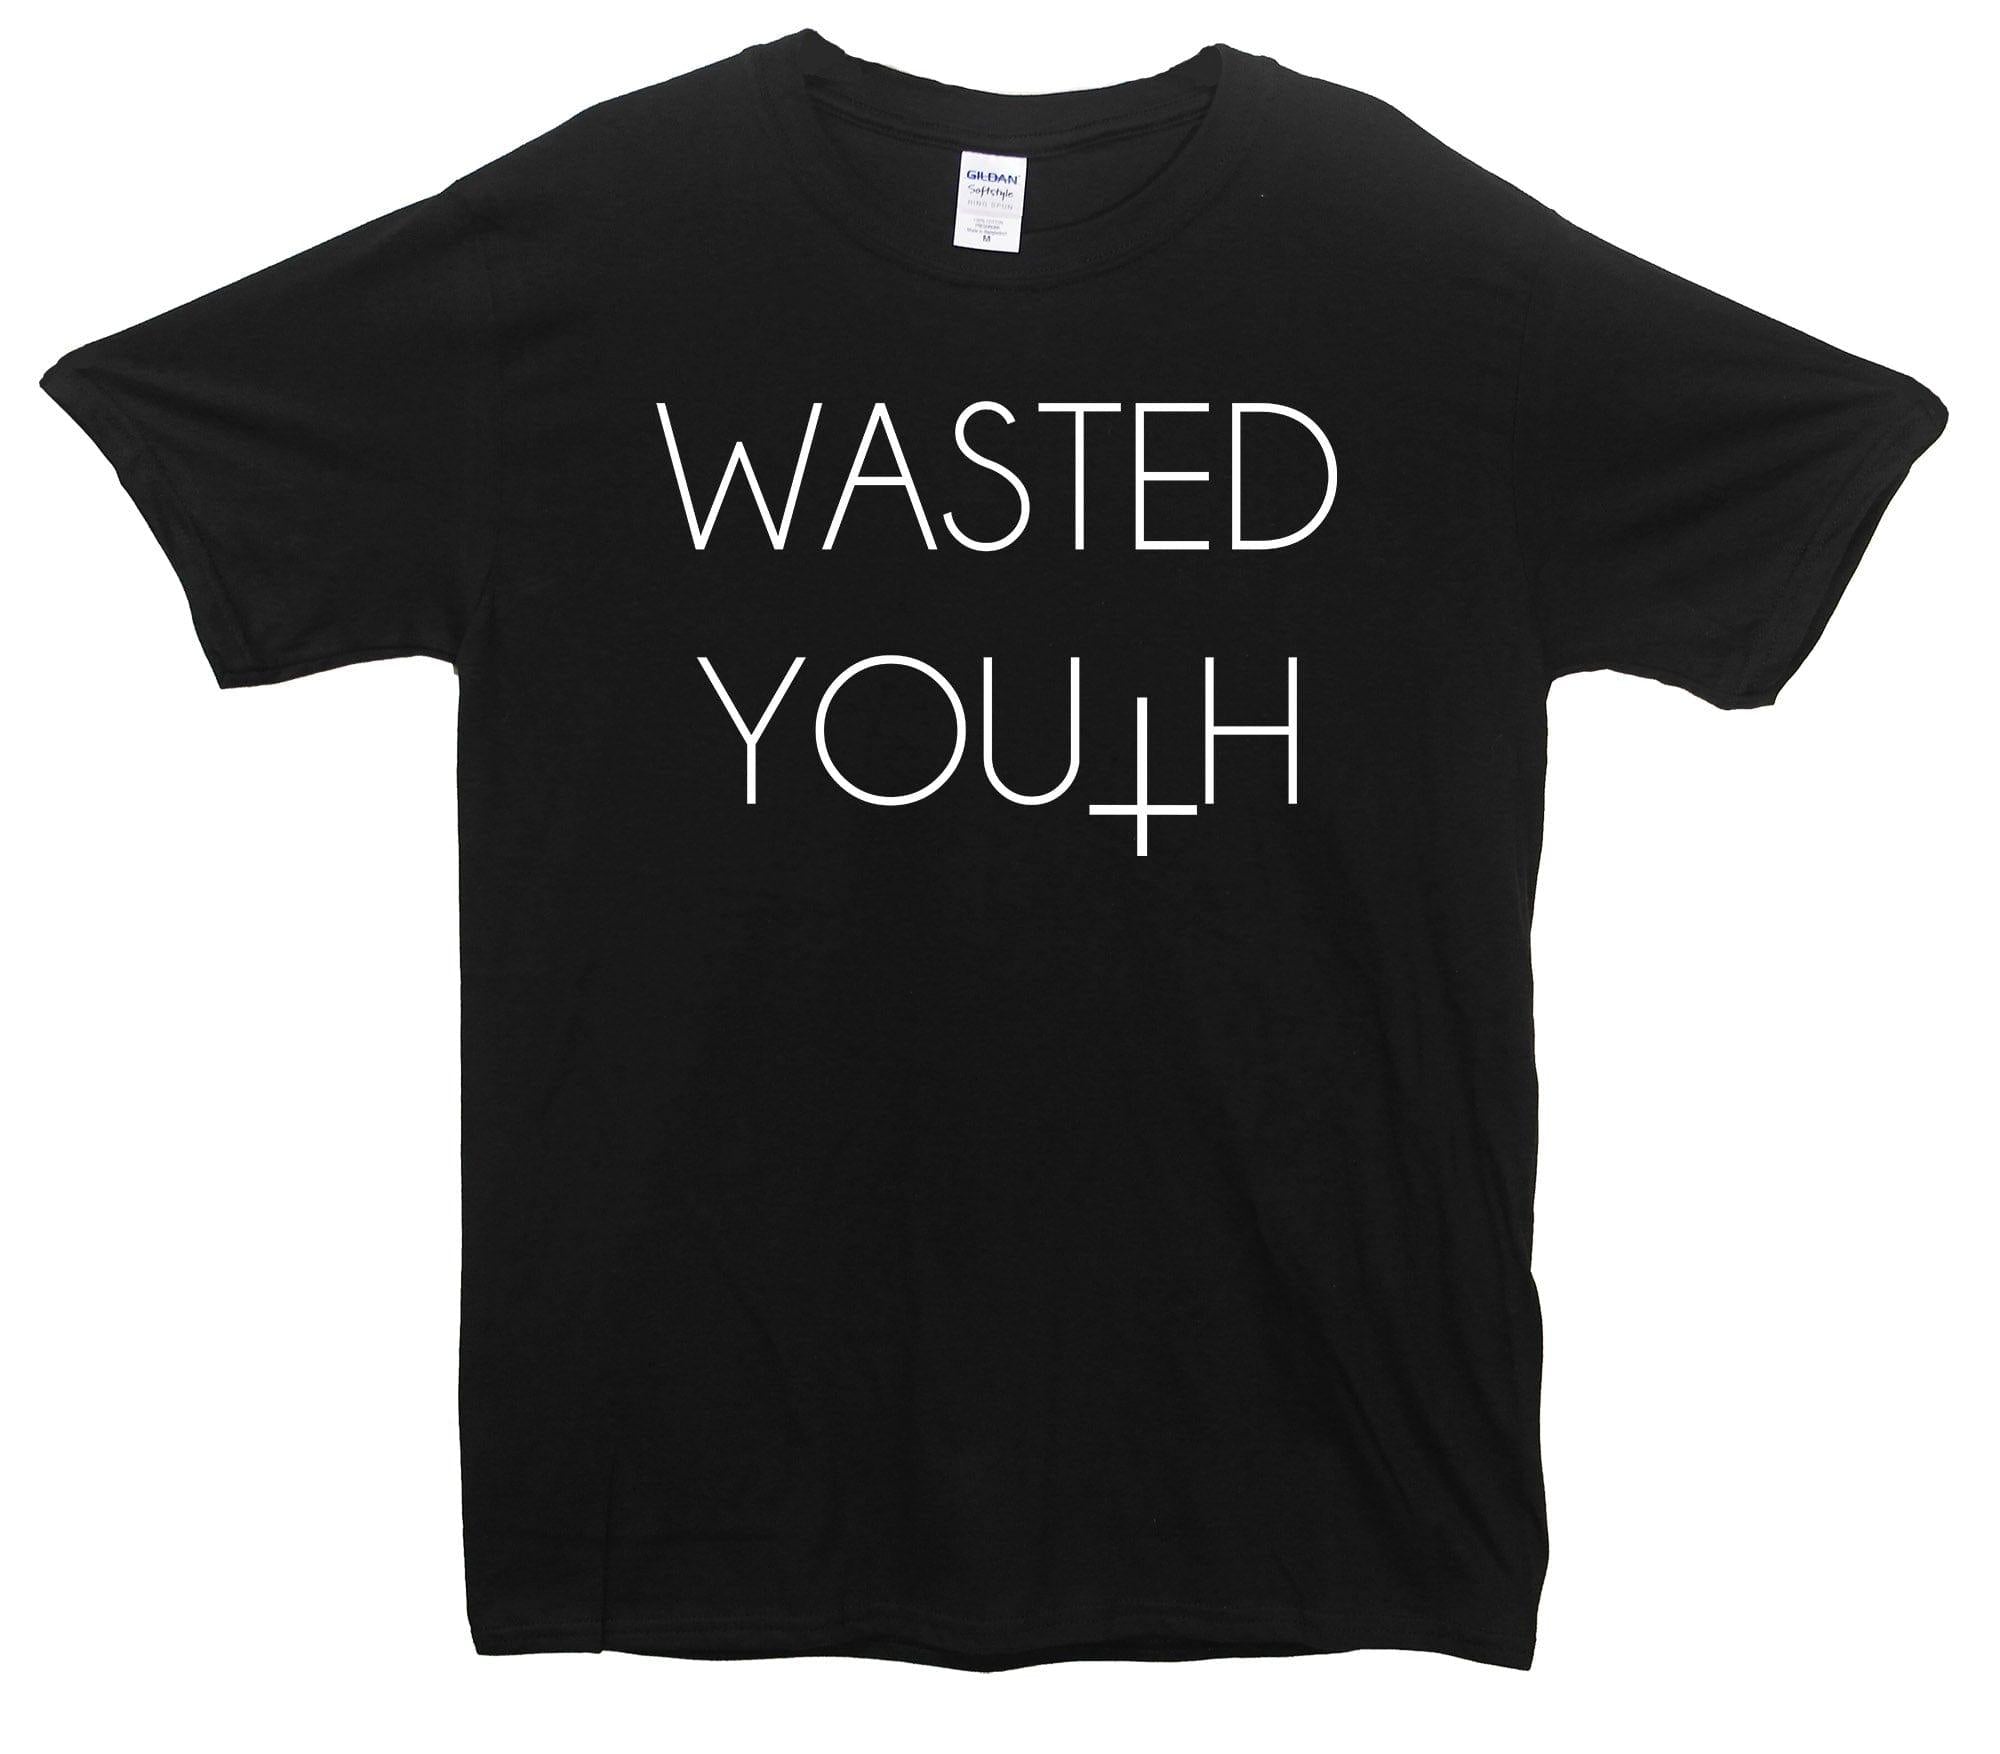 Wasted Youth Printed T-Shirt